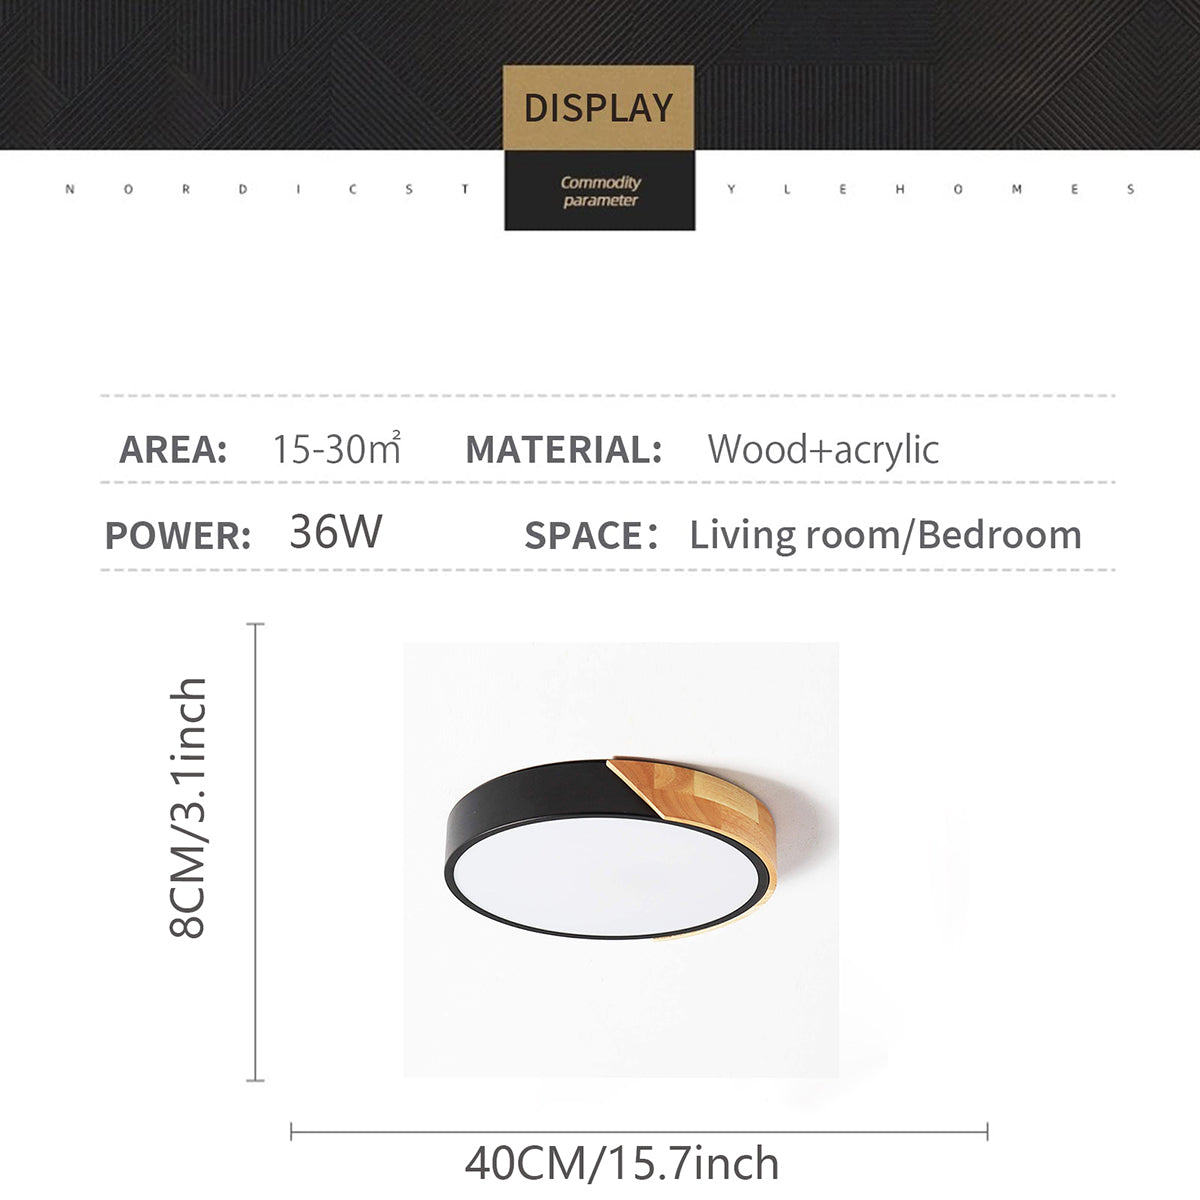 WDENI Ceiling Lights Dimmable Modern Wood Flush Mount Ceiling Light, Light Fitting Ceiling for Living Room Bedroom Kitchen Lounge Hallway, 15.7Inch,36W